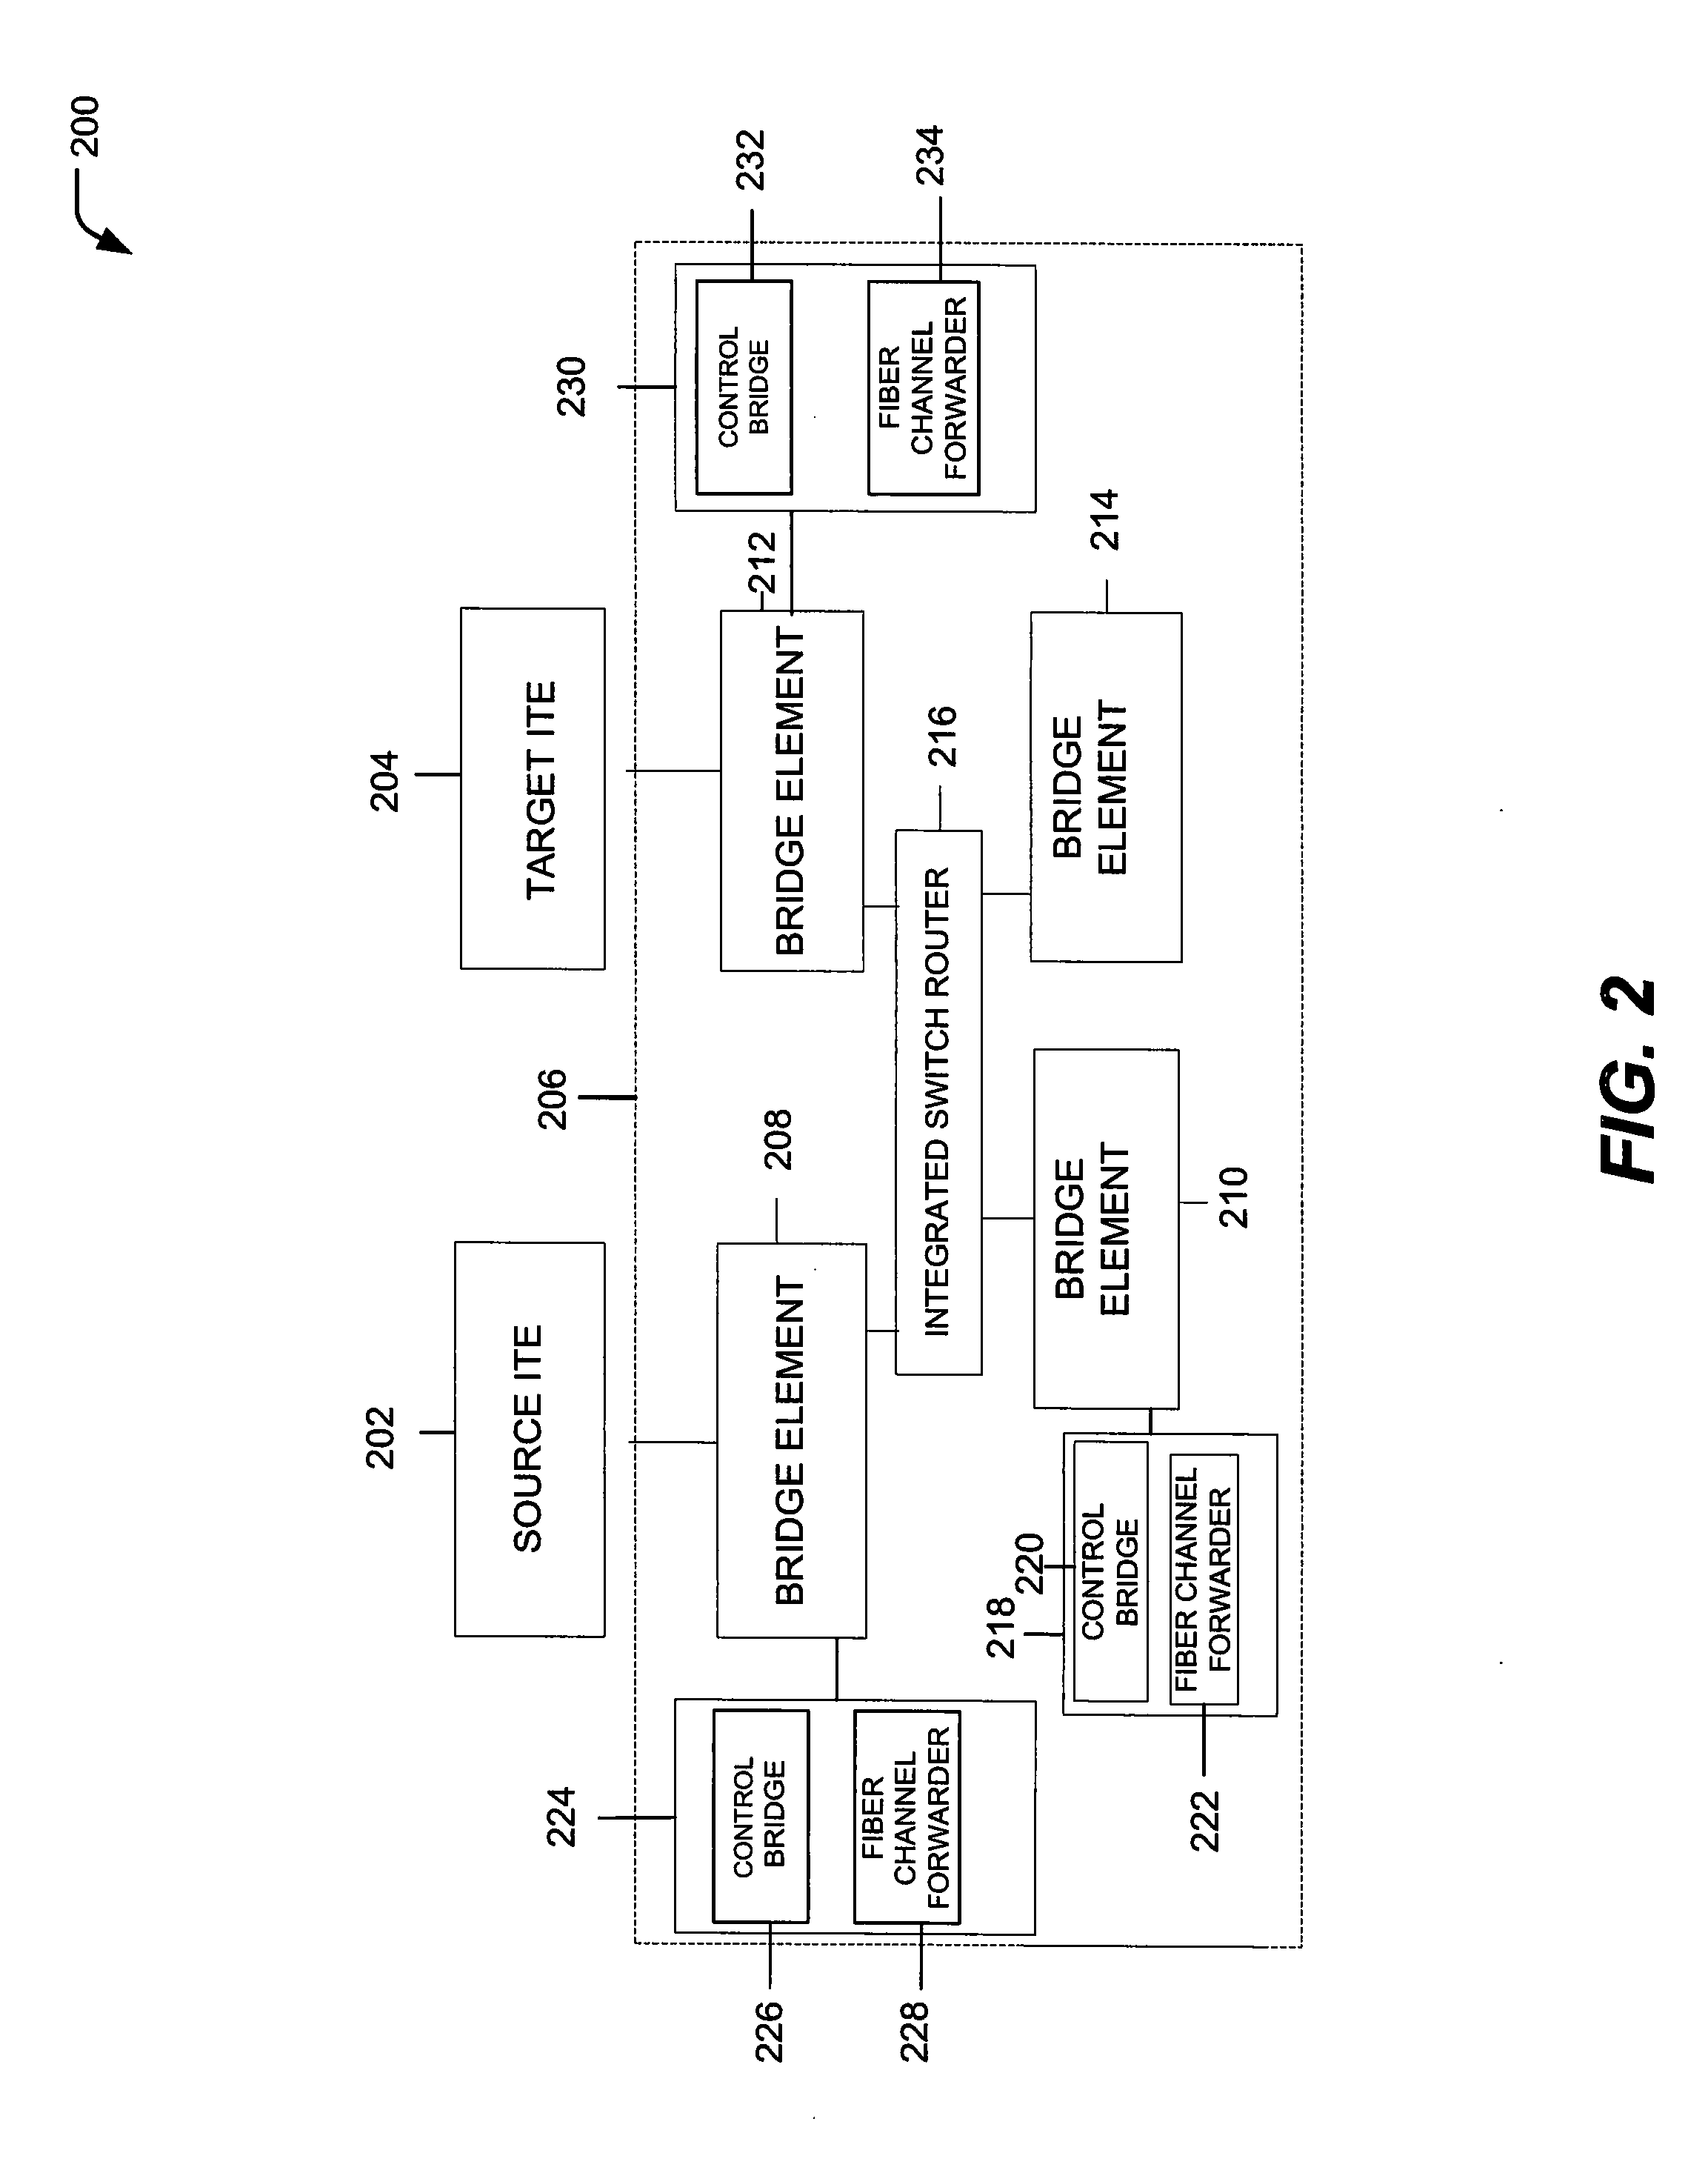 Forwarding Data Frames With a Distributed Fiber Channel Forwarder